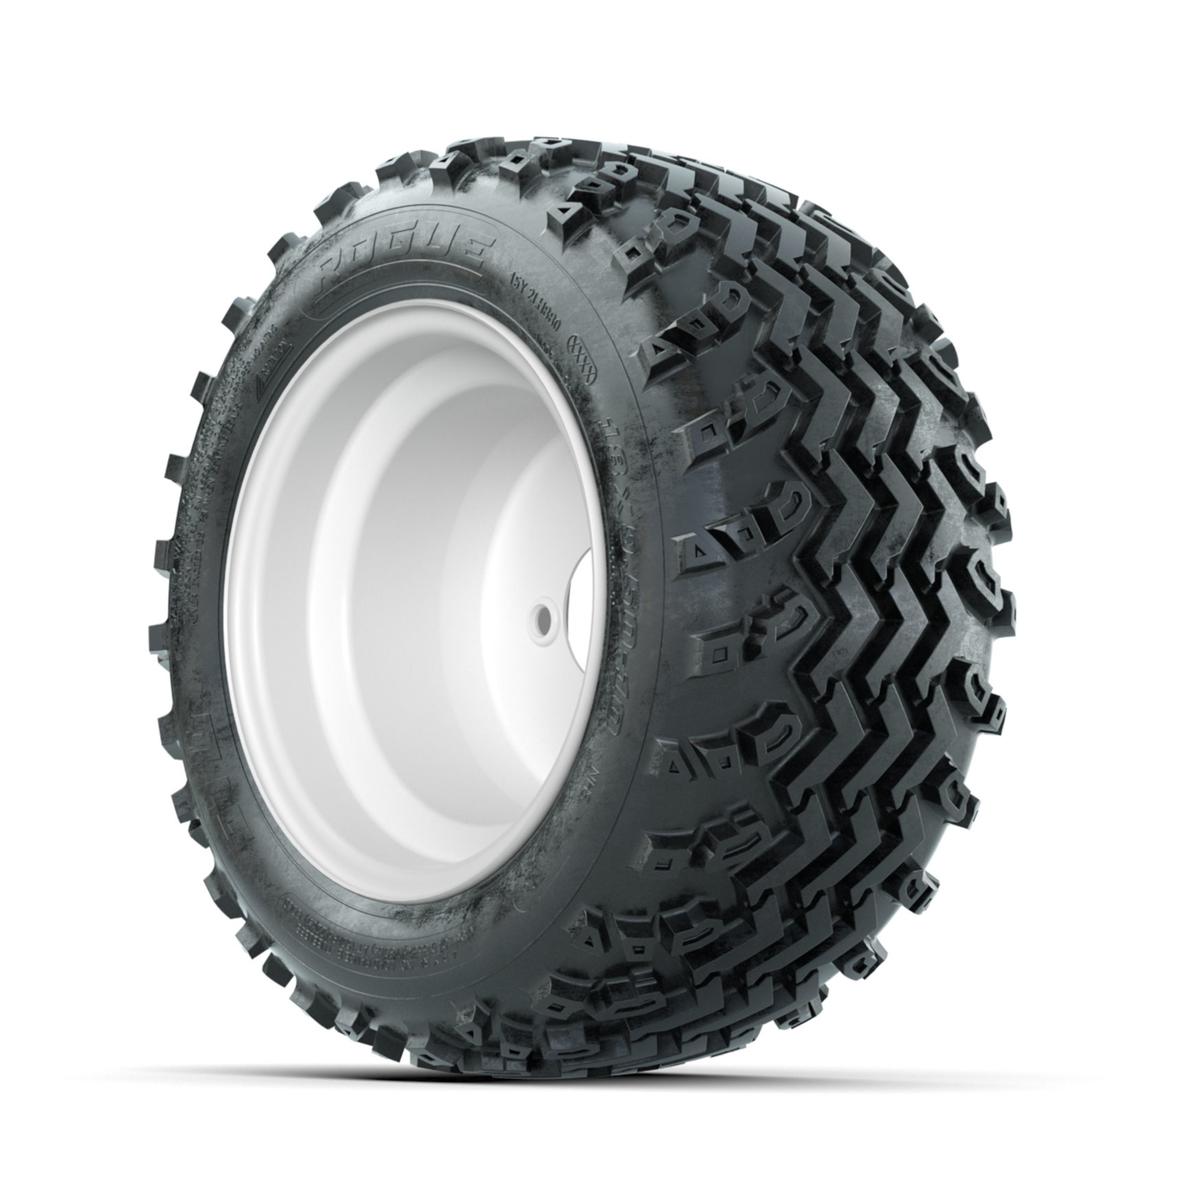 GTW Steel White 3:5 Offset 10 in Wheels with 18x9.50-10 Rogue All Terrain Tires – Full Set